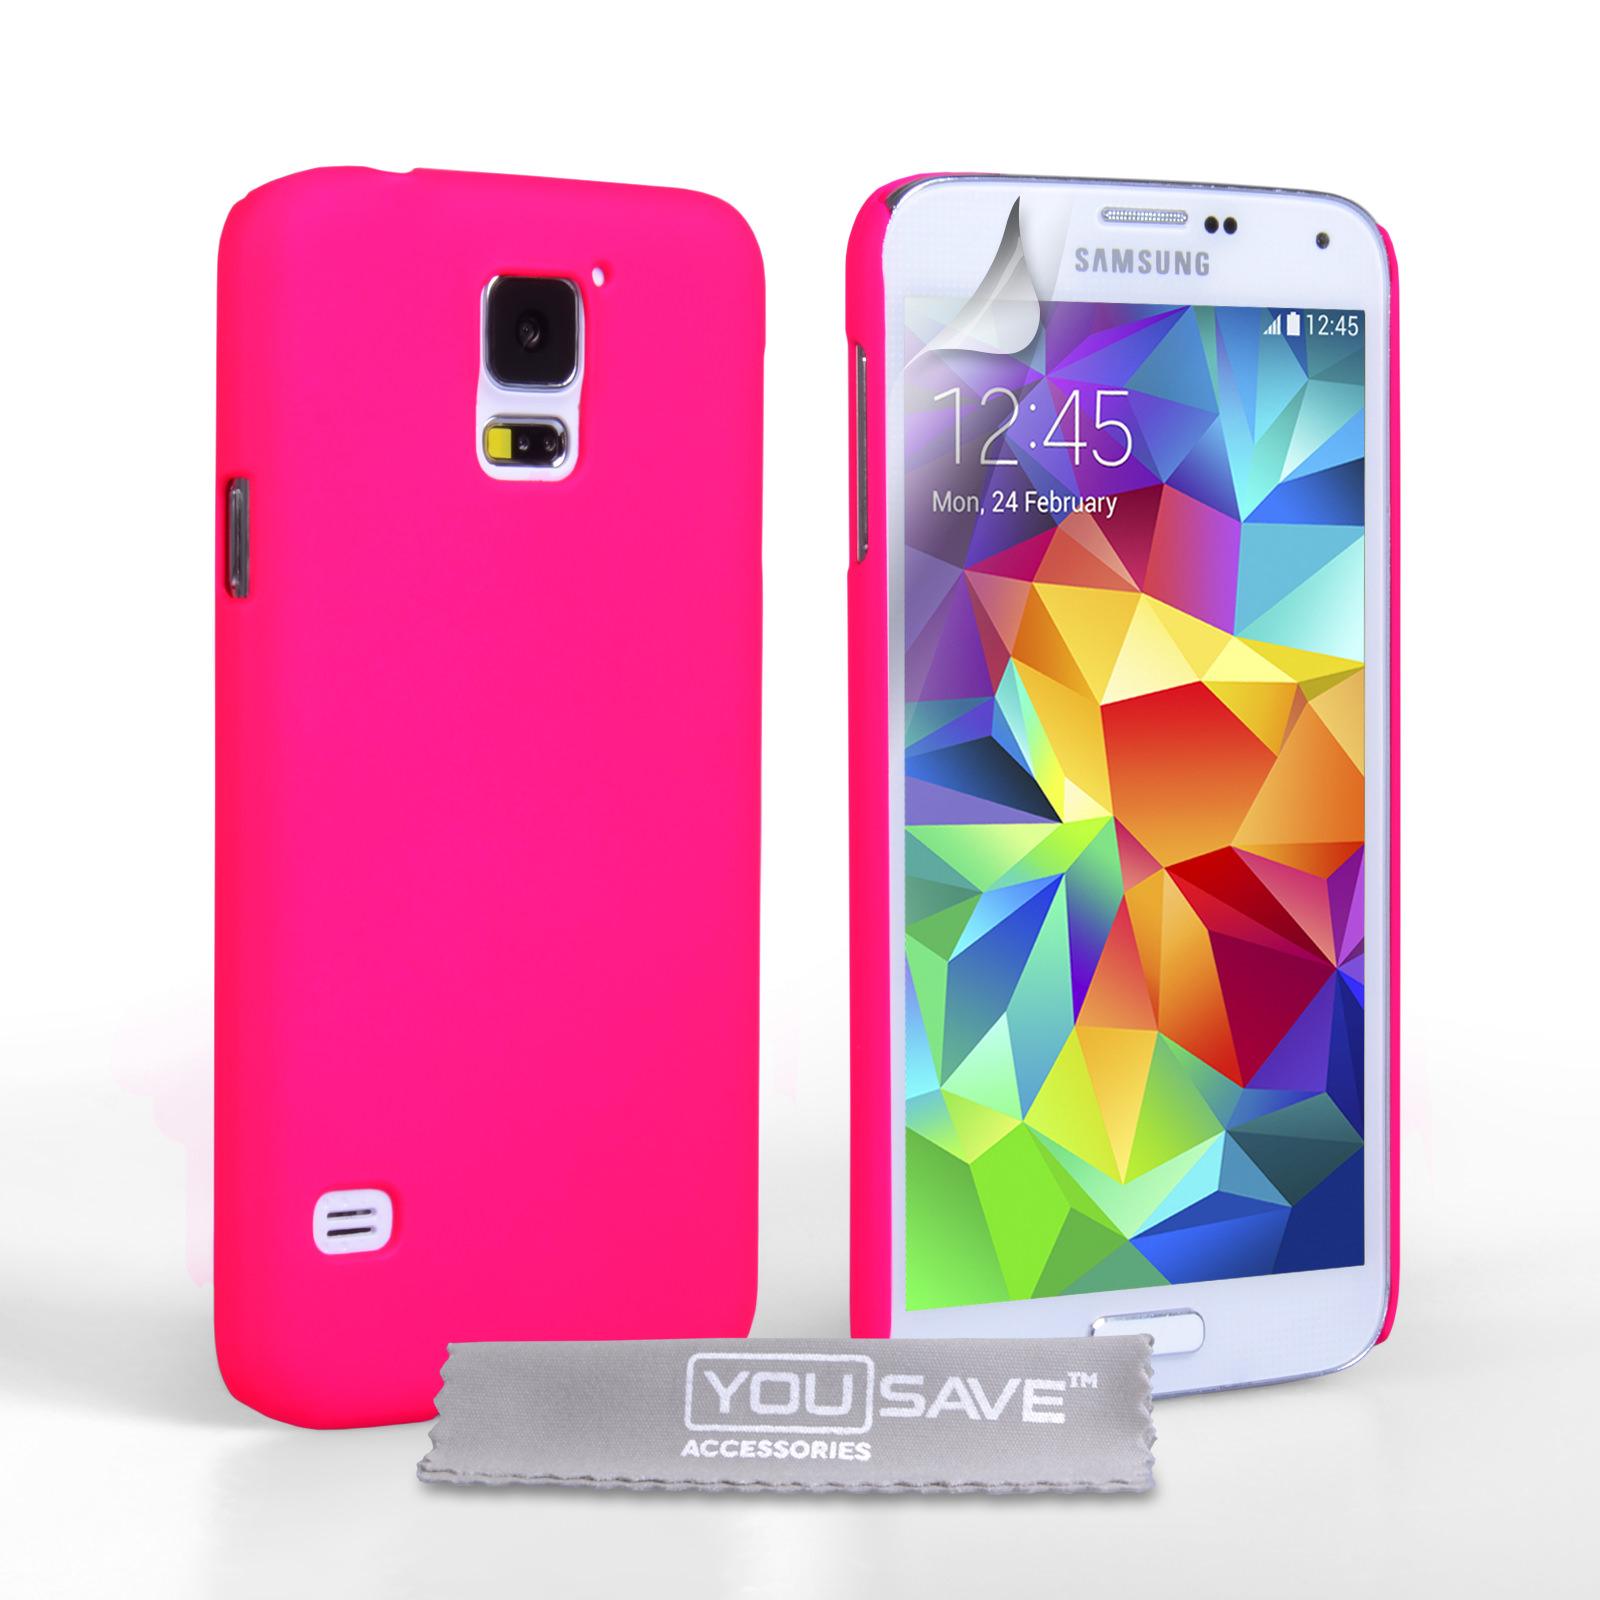 YouSave Accessories Samsung Galaxy S5 Hard Hybrid Case - Hot Pink